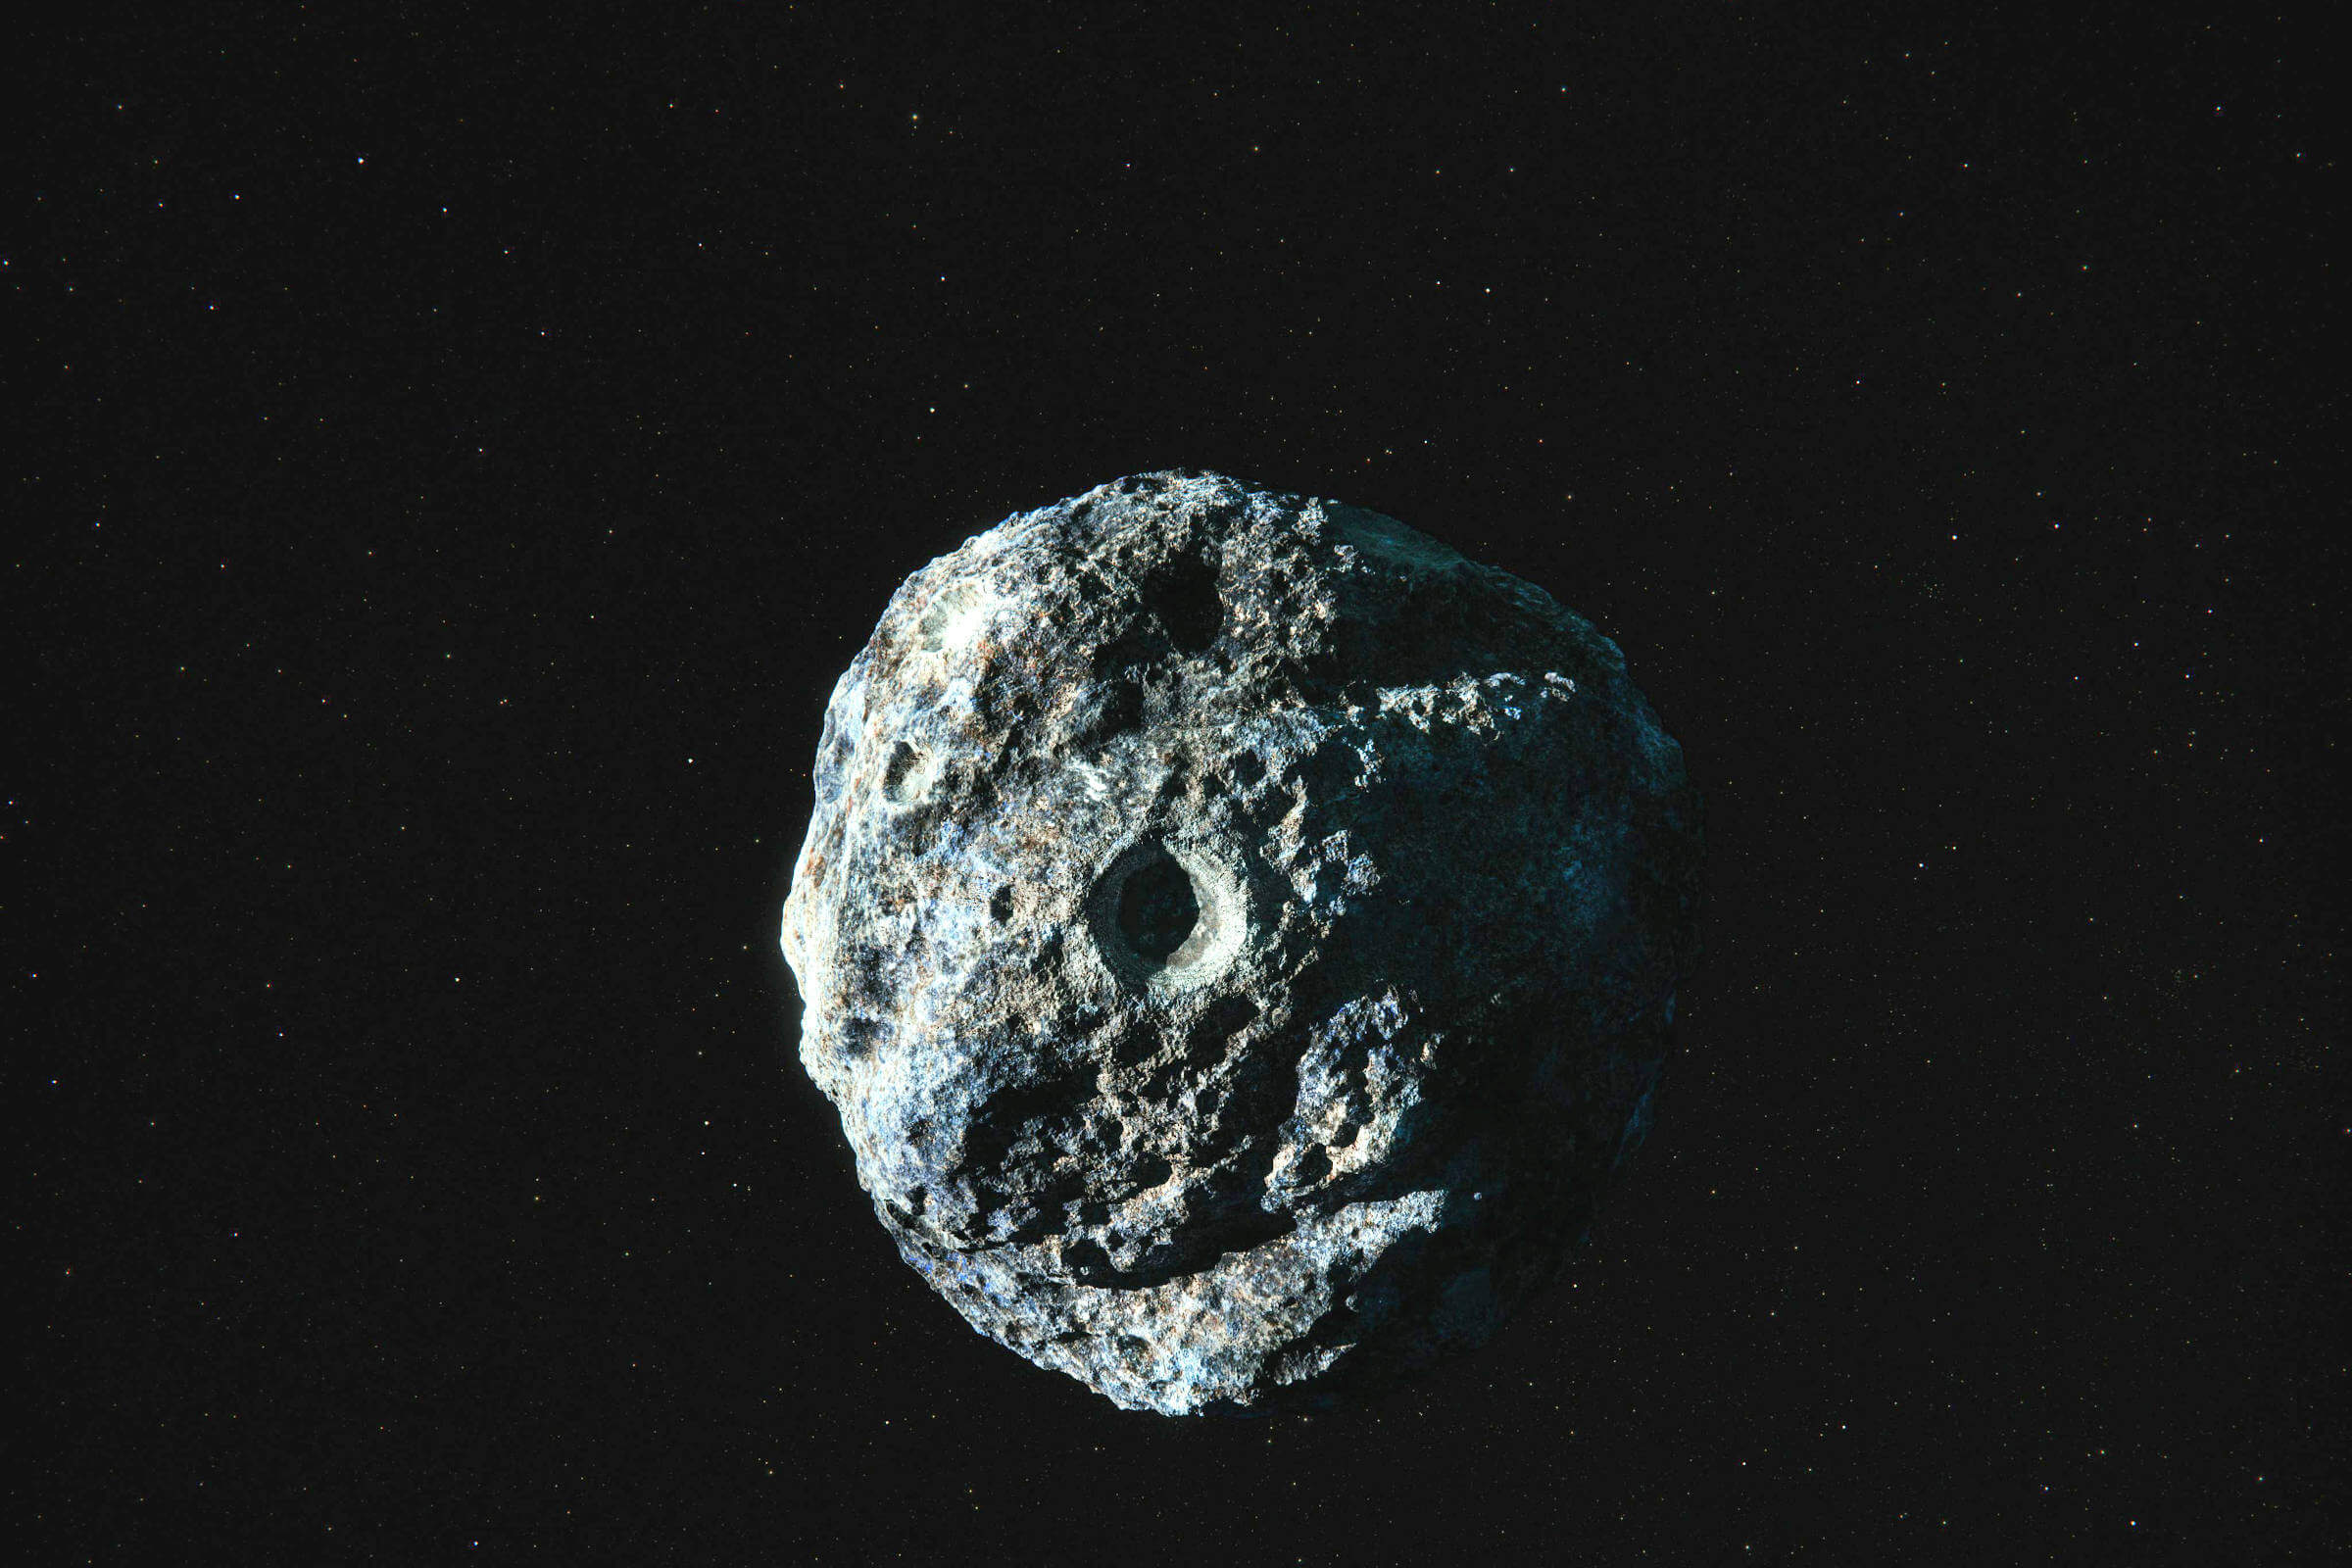 Witness asteroids leftover from the formation of our solar system that dwell in the asteroid belt, like the M-type or metallic asteroid.